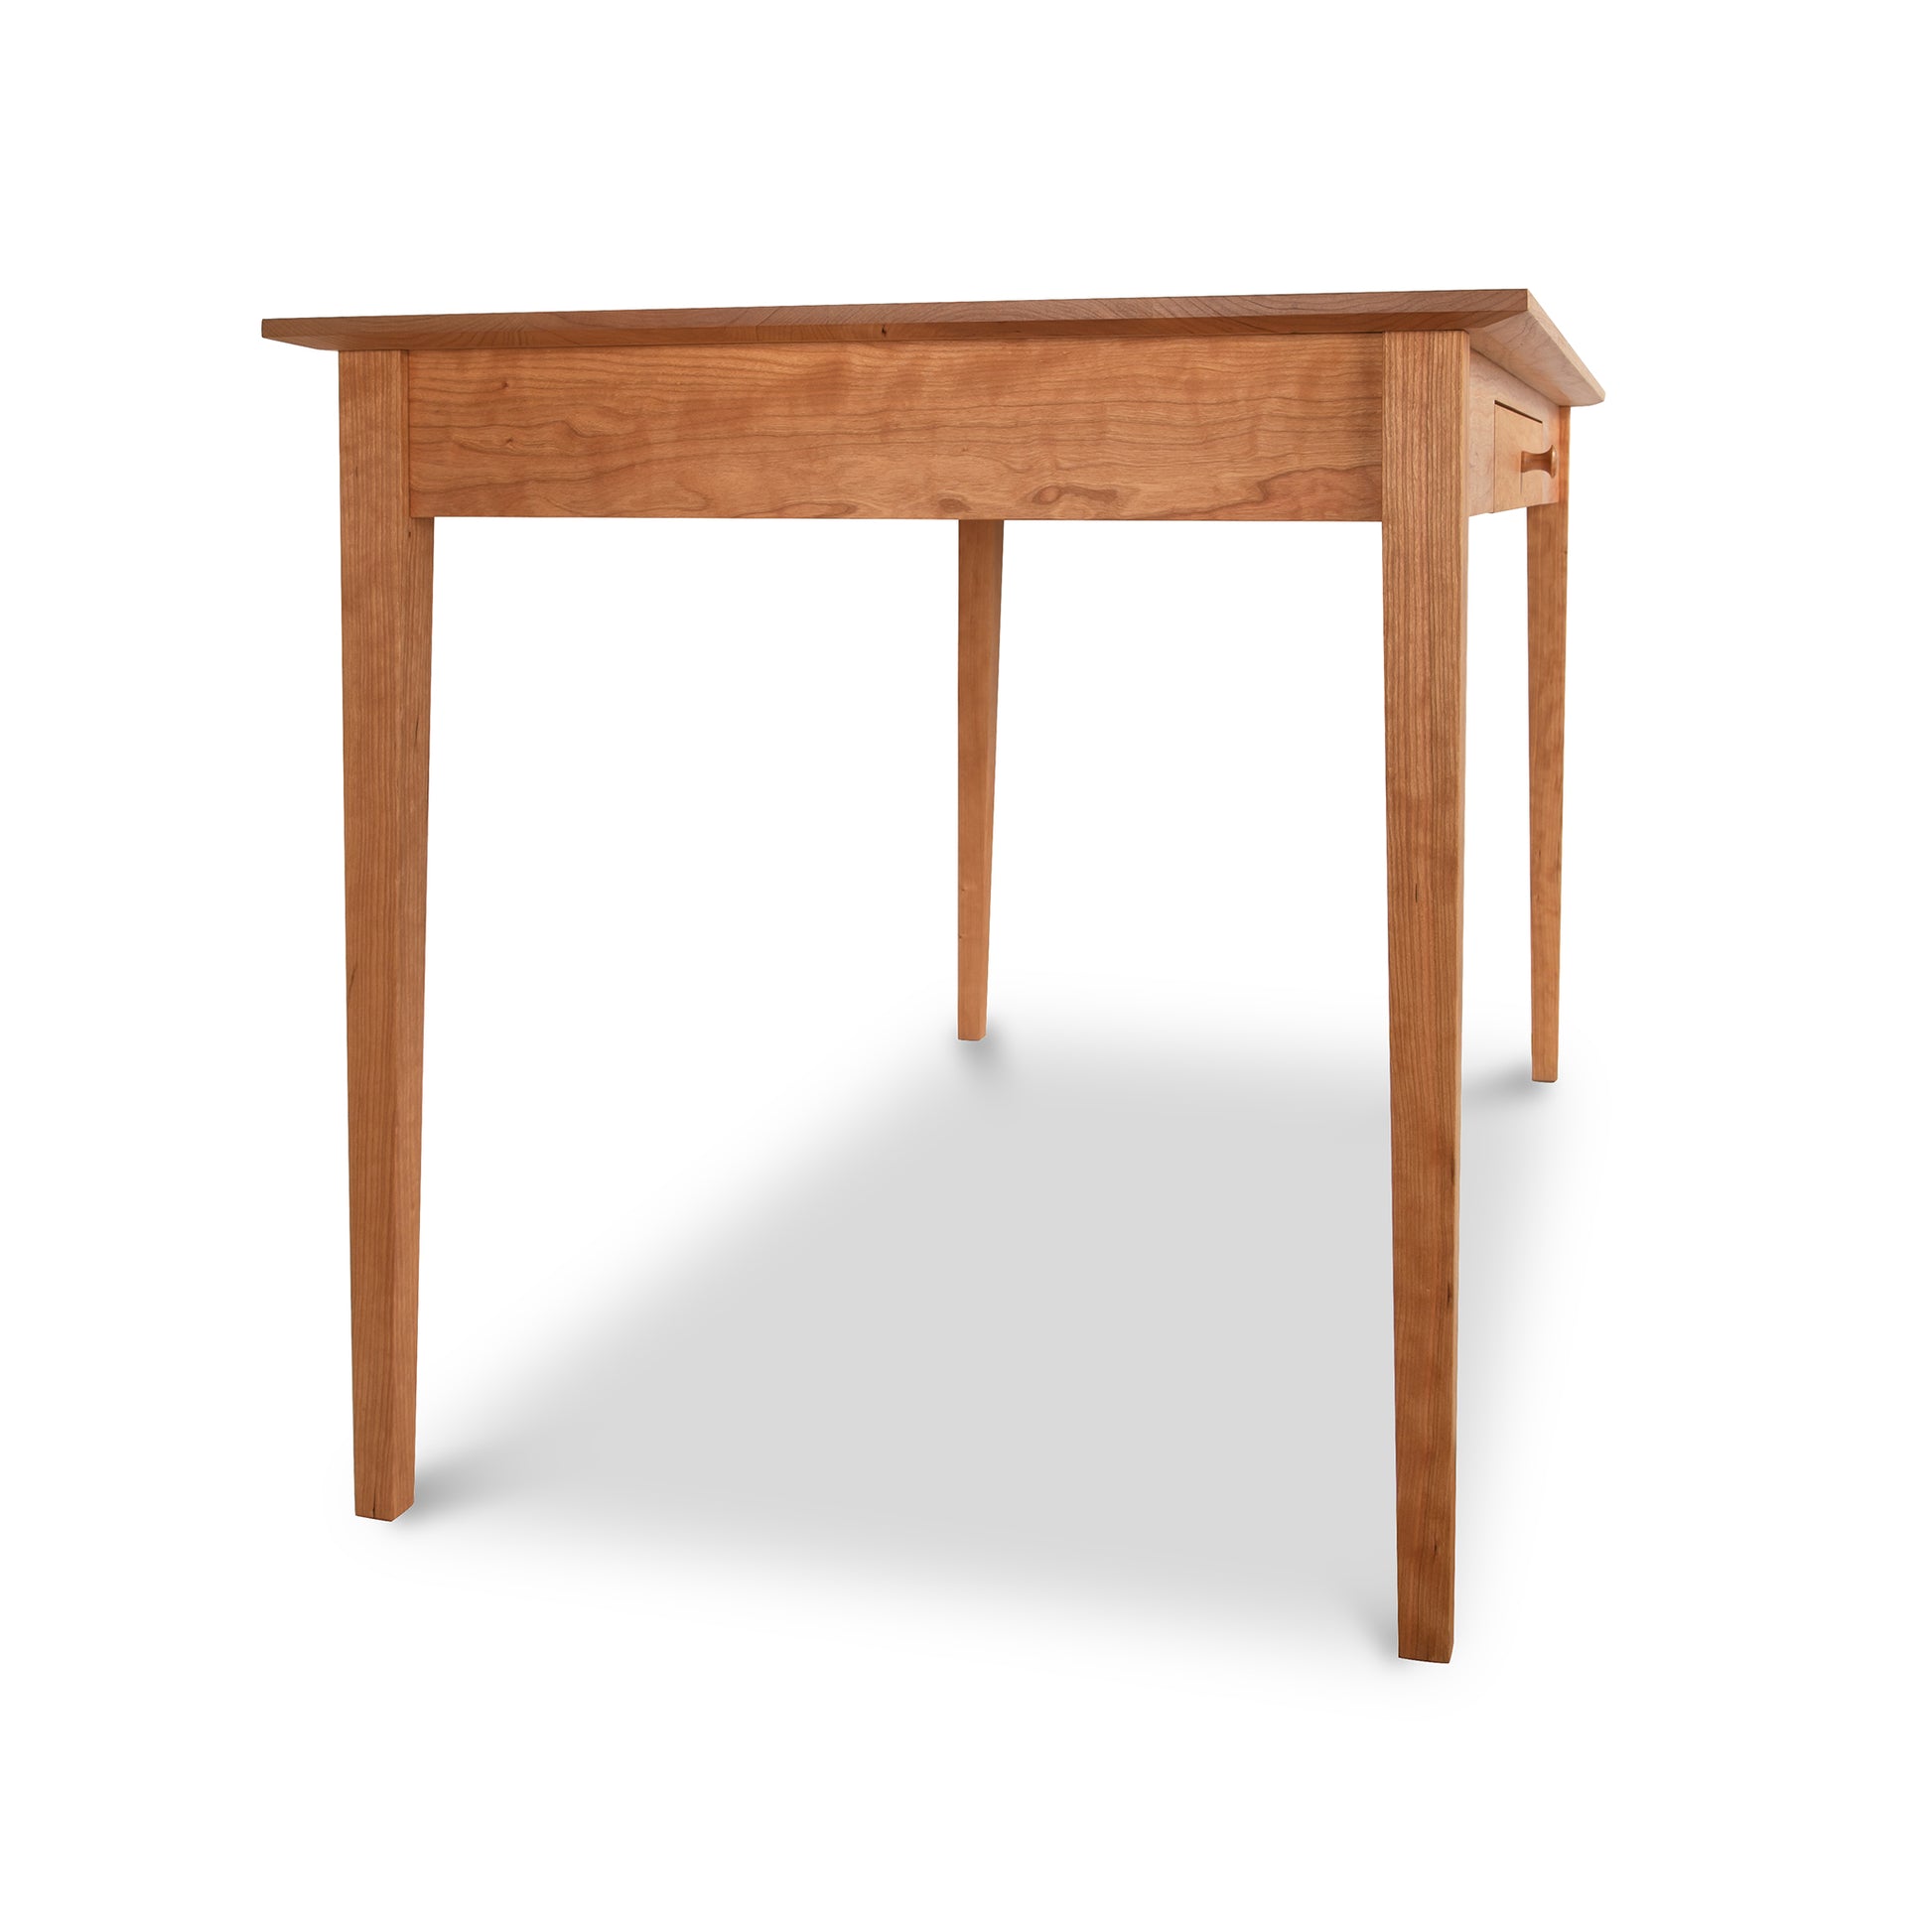 A natural cherry wooden table with a wooden top and legs, inspired by the Maple Corner Woodworks American Shaker Writing Desk from Vermont.